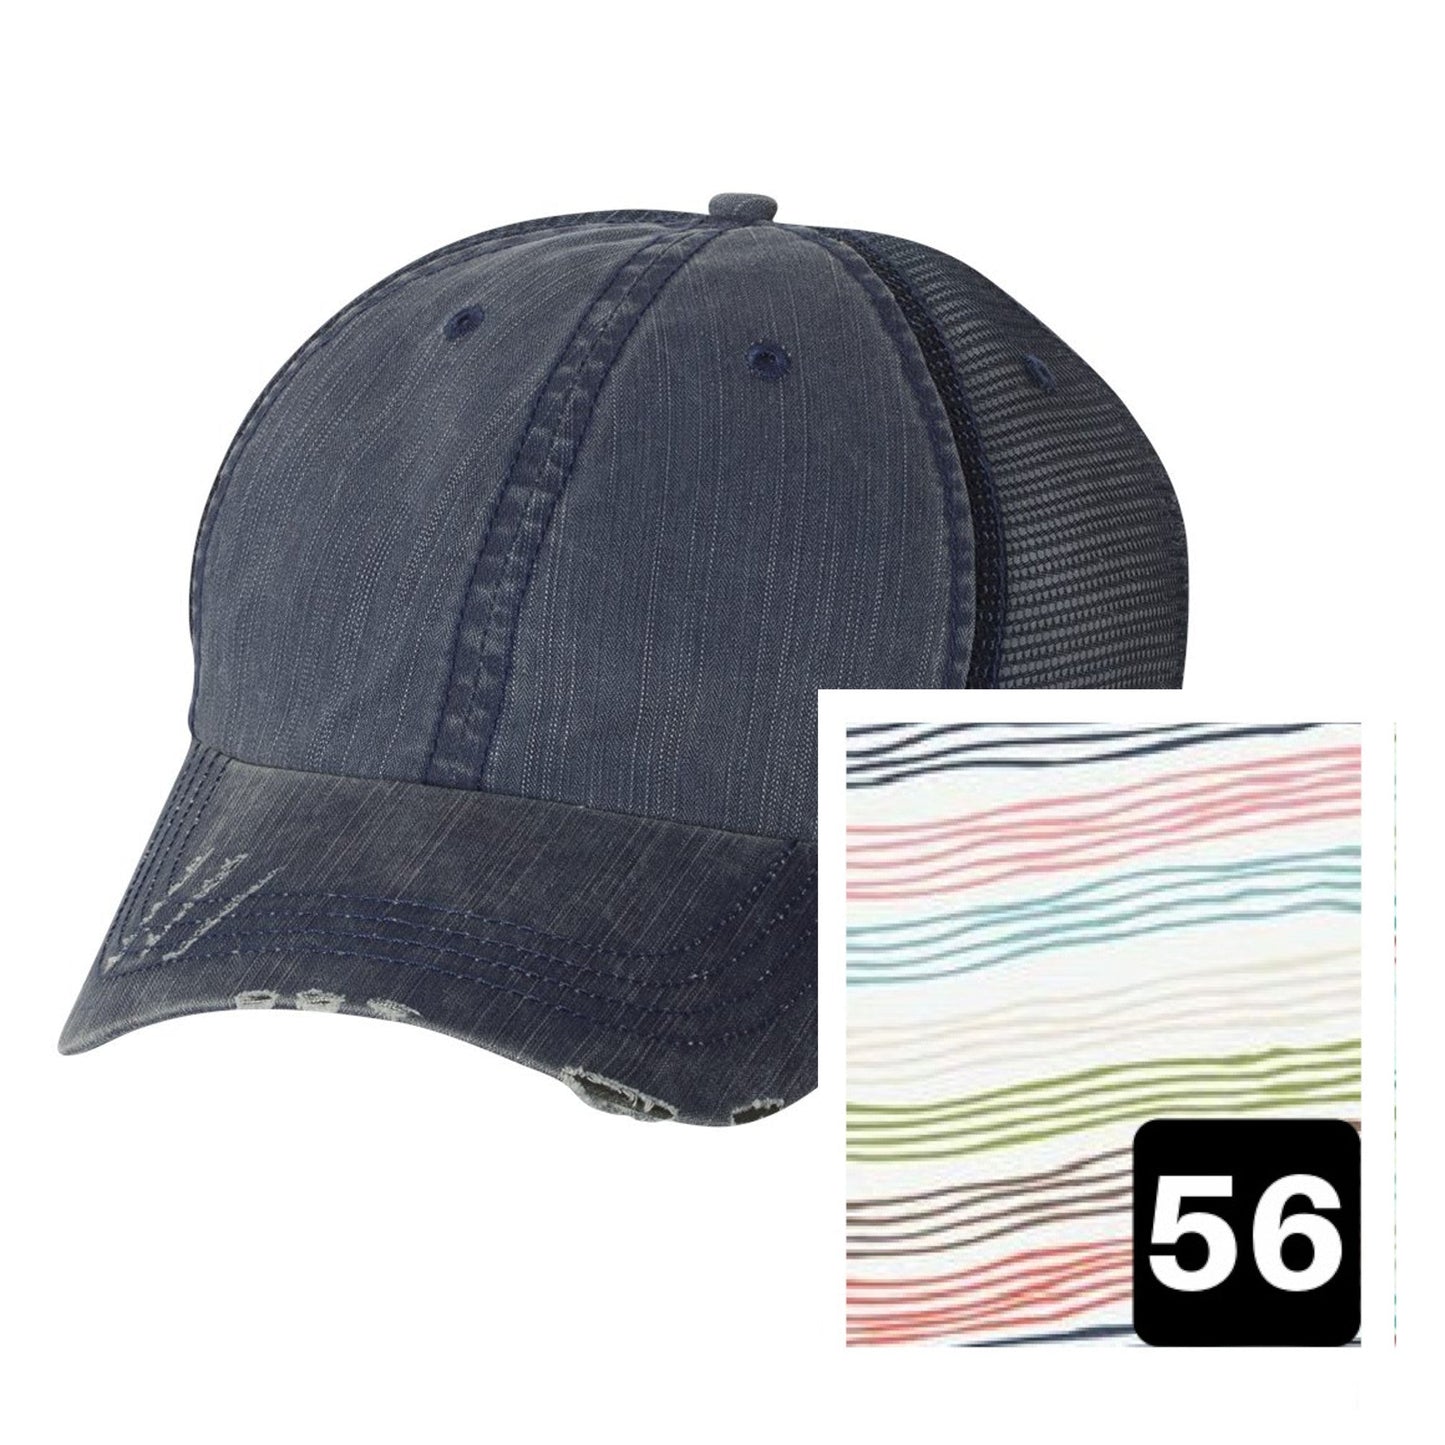 Connecticut Hat | Navy Distressed Trucker Cap | Many Fabric Choices